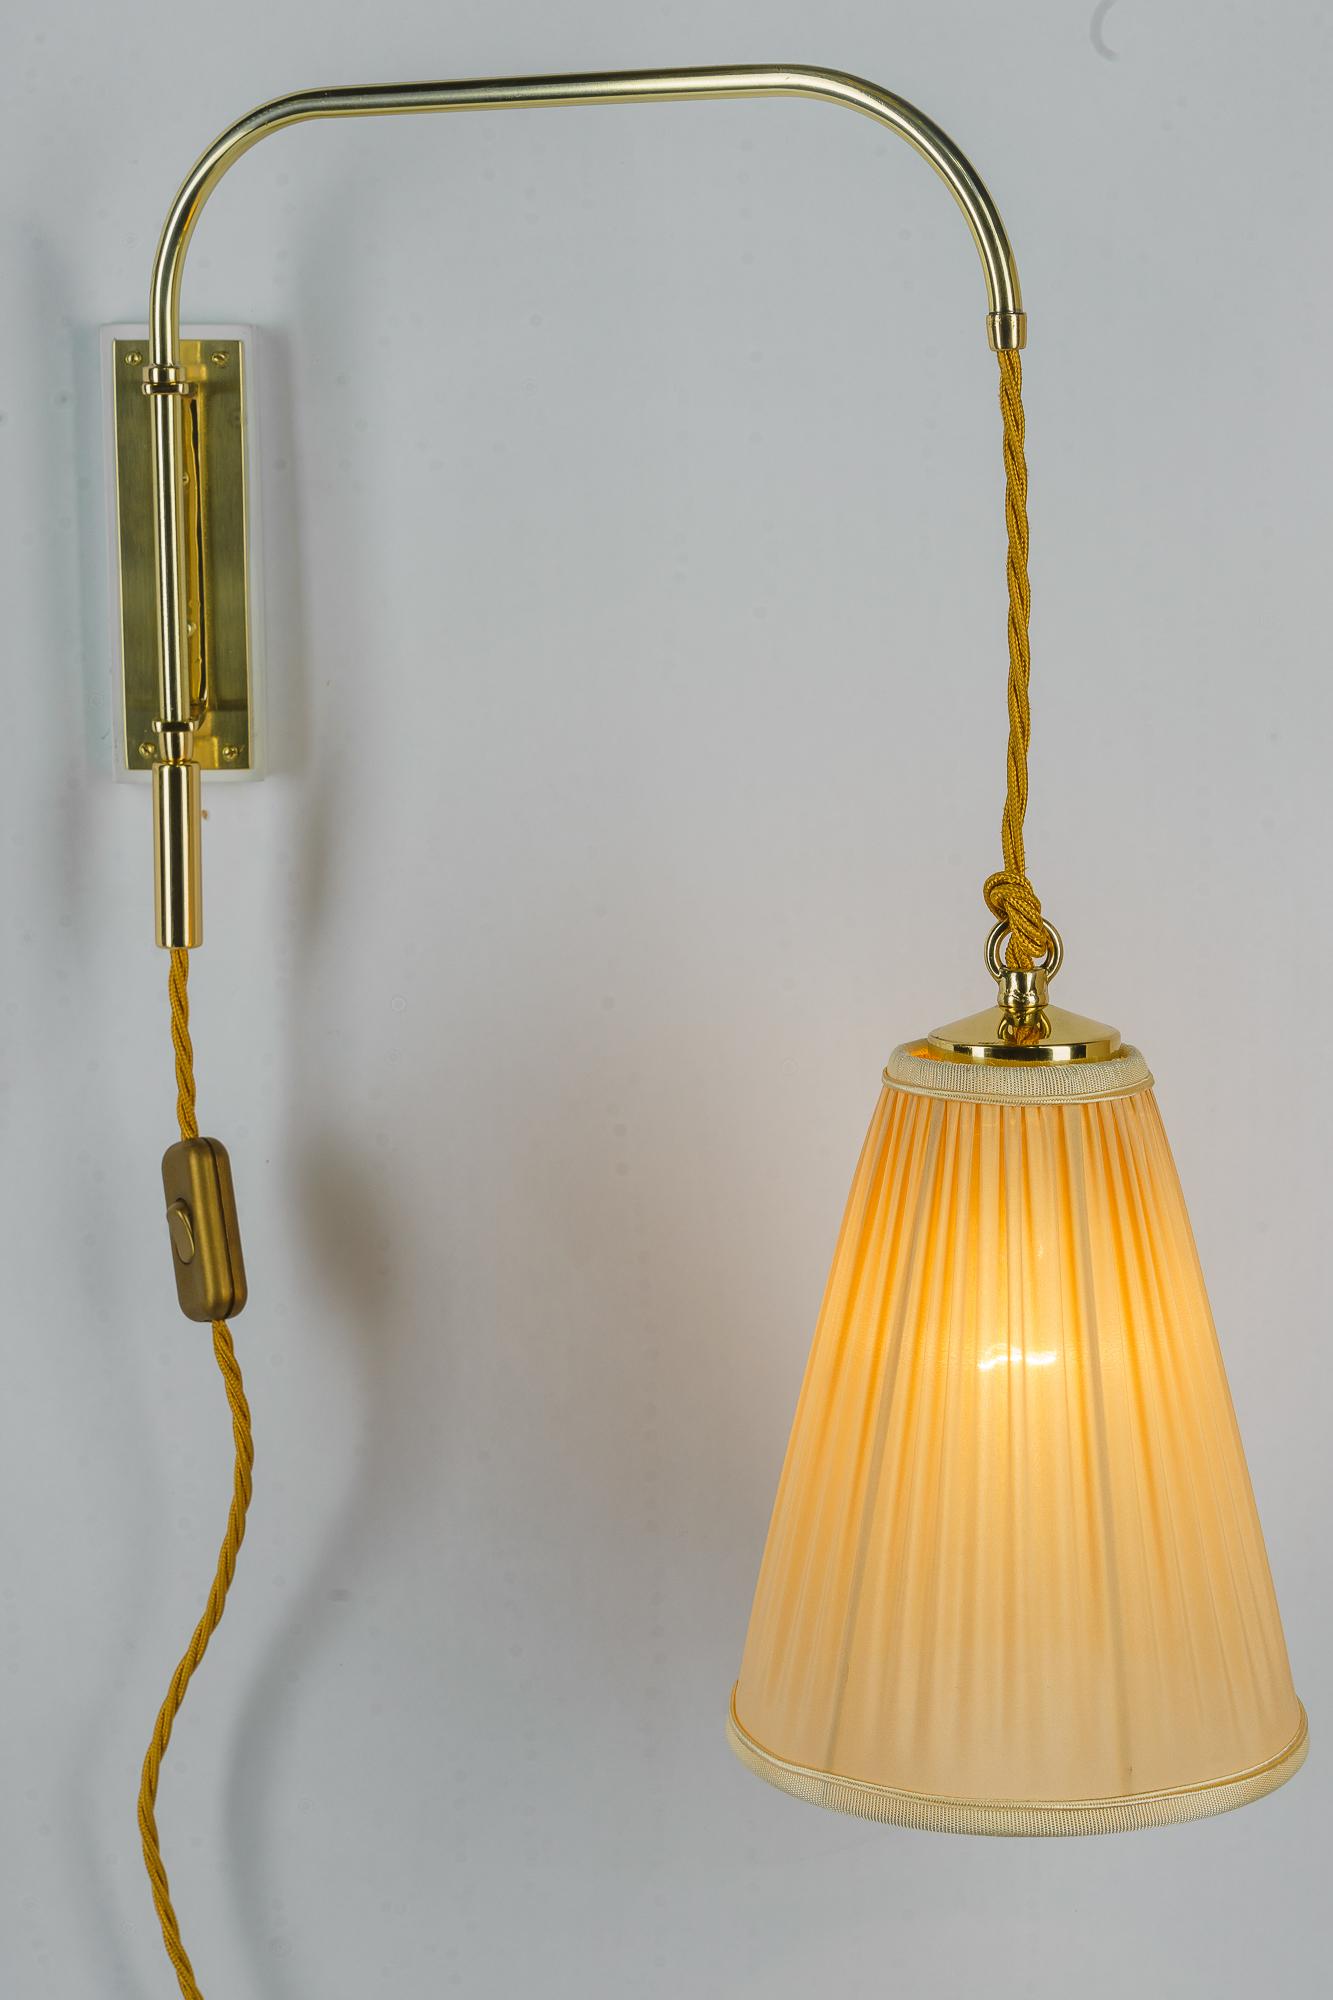  Cable in height adjustable art deco wall lamp 1920s For Sale 4